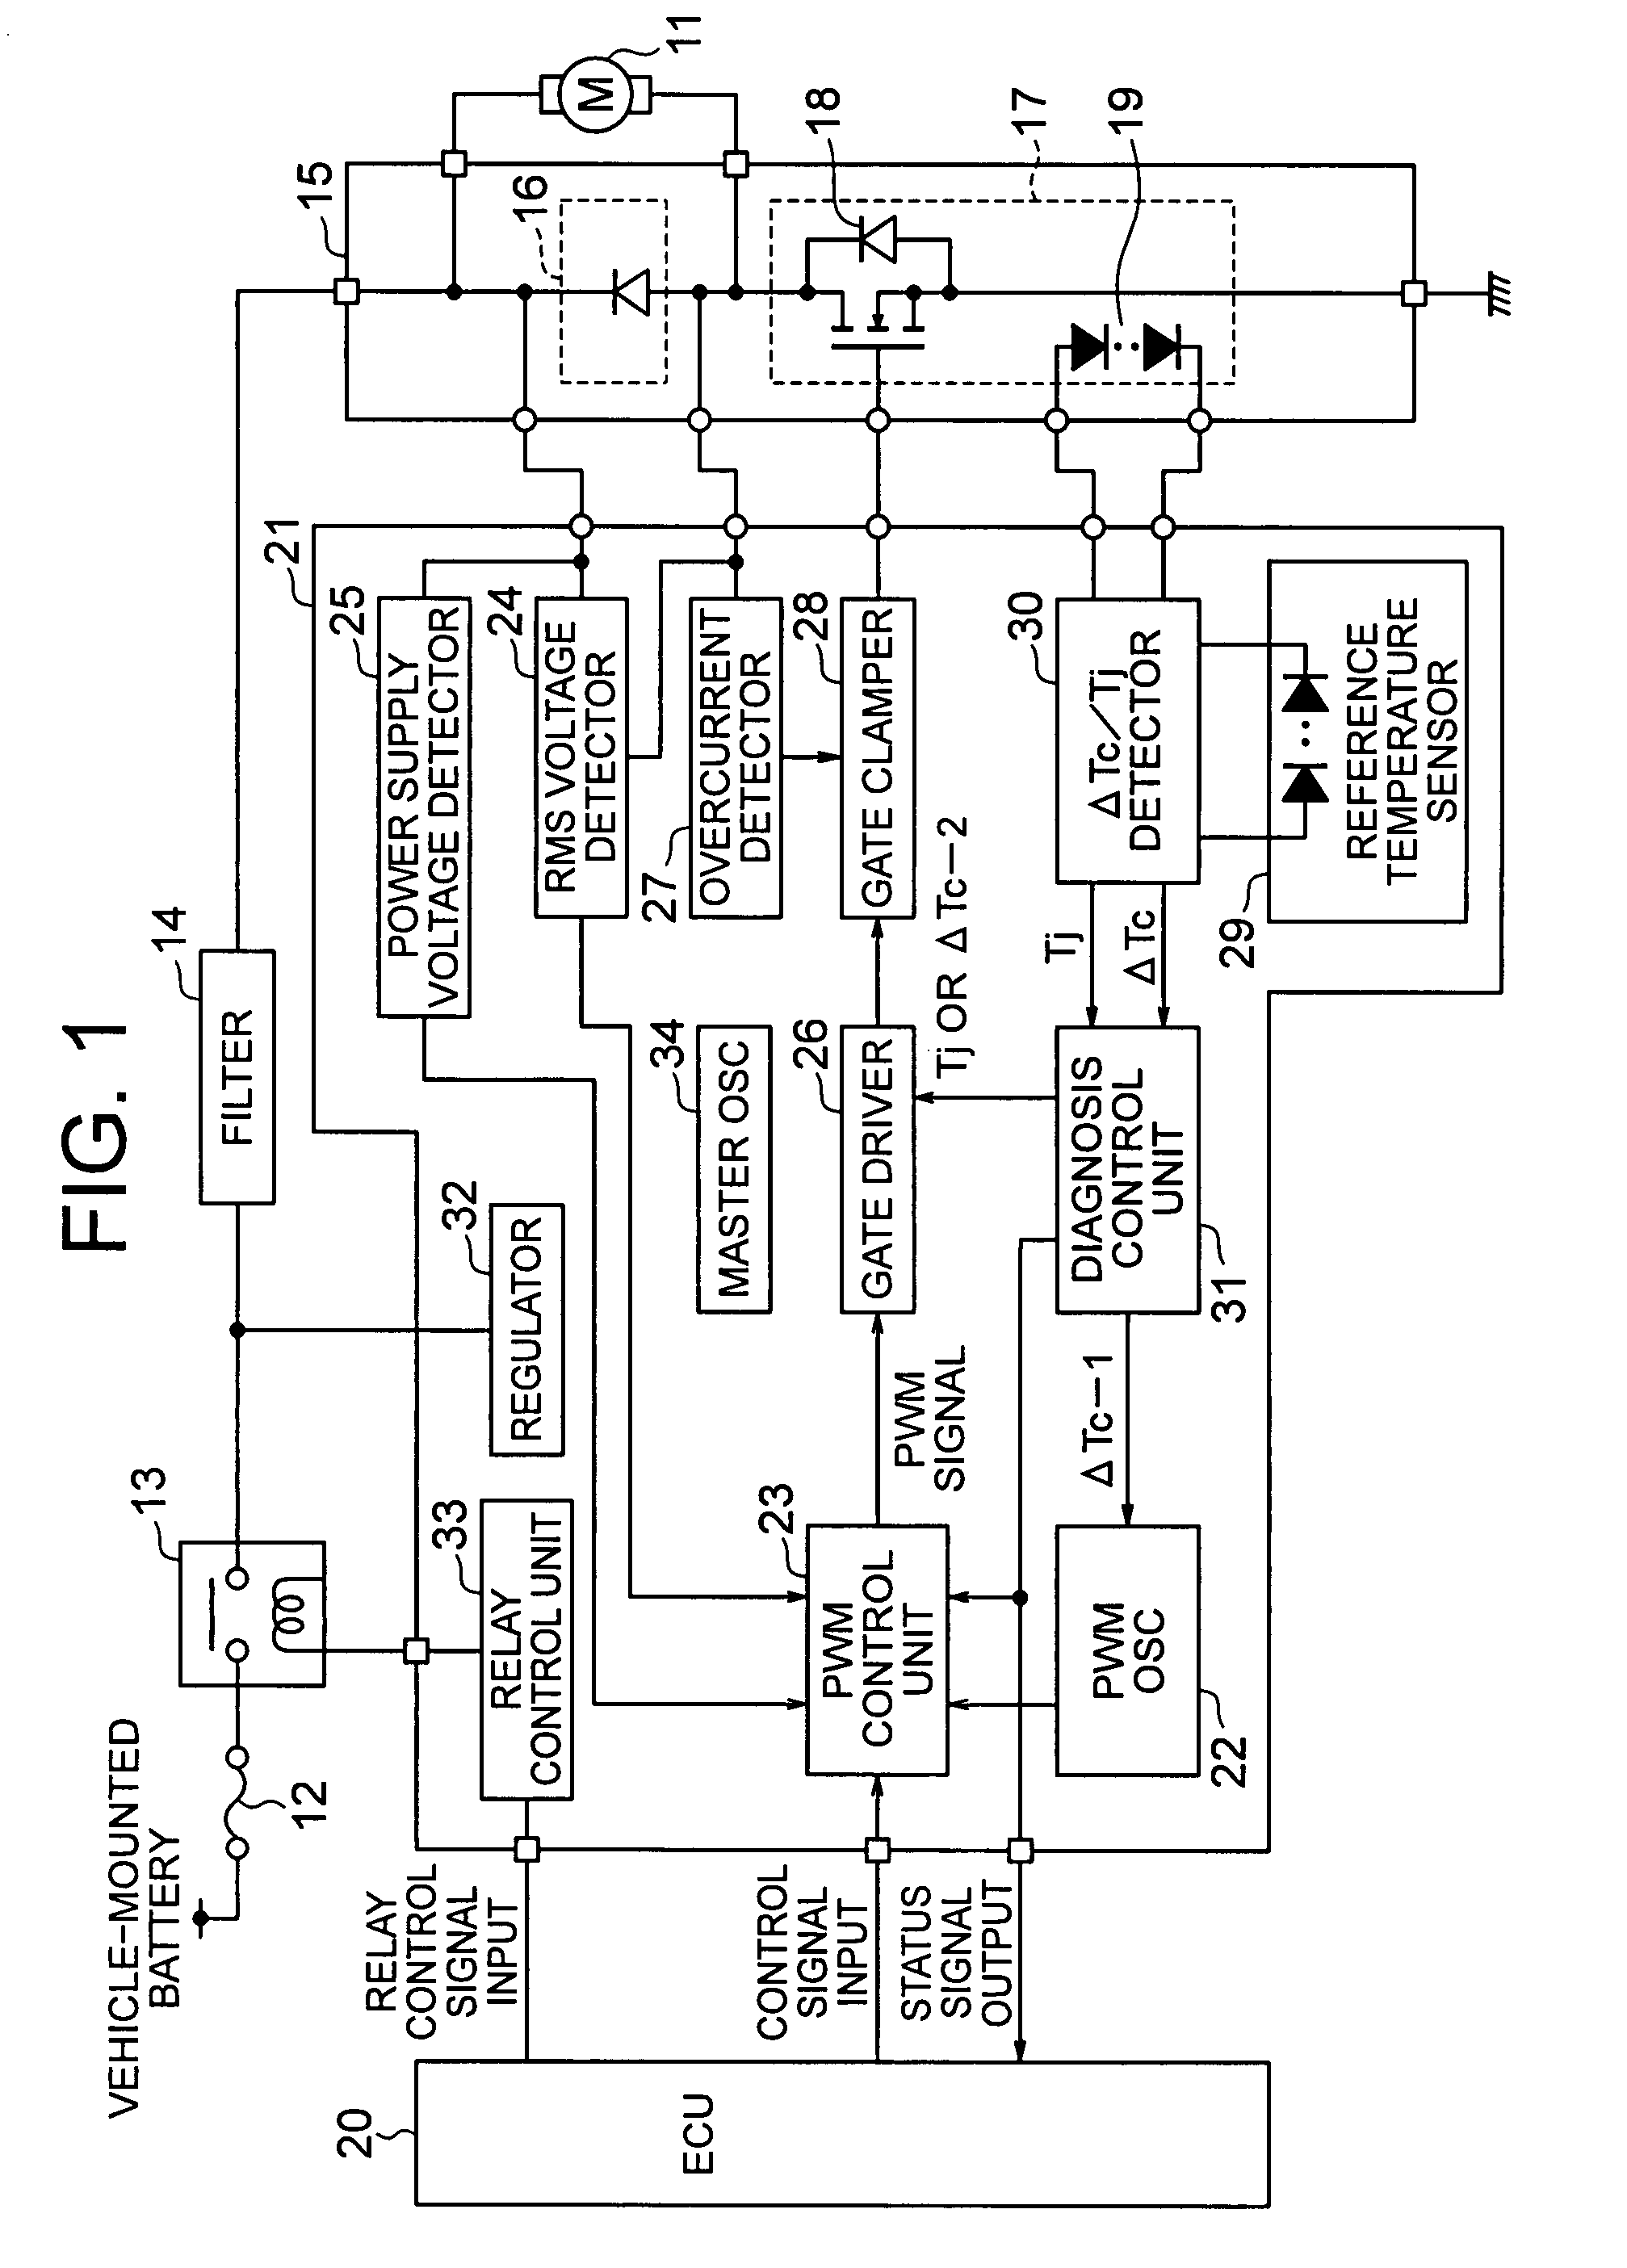 Apparatus and method for detecting abnormal conditions of a motor